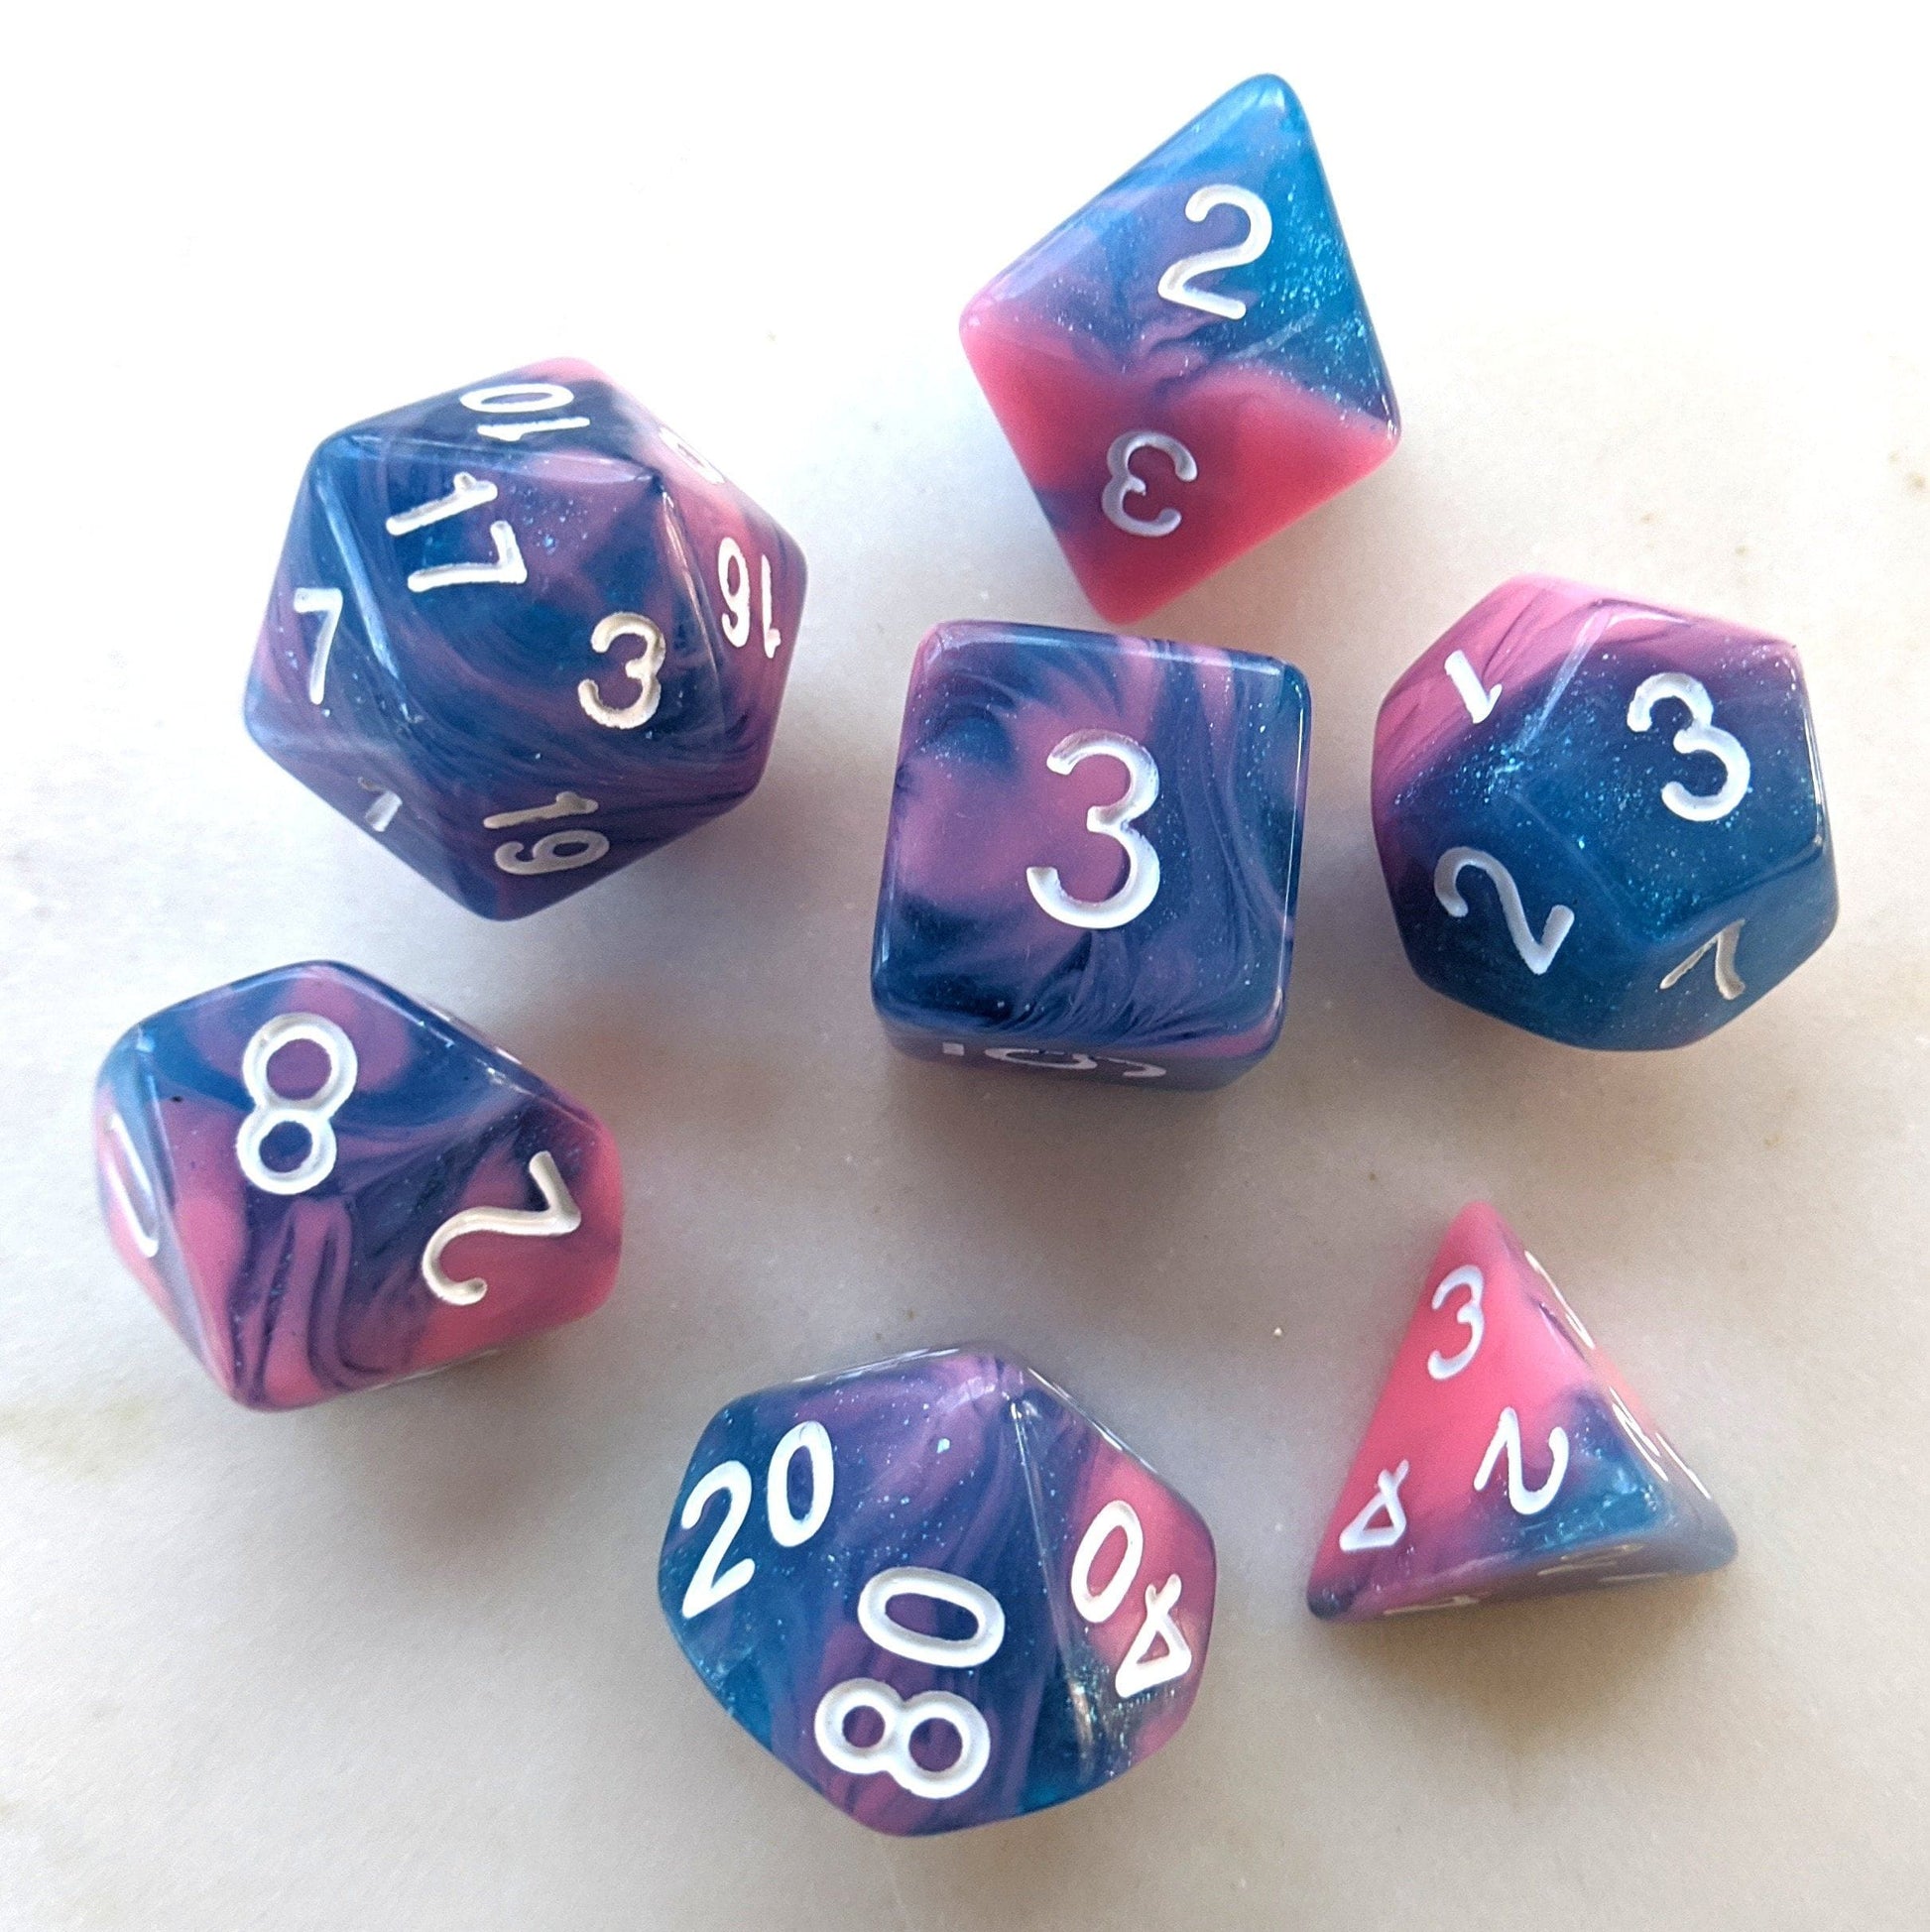 Miami Vice Dice Set. Blue and pink marbled glittery DnD dice set - CozyGamer